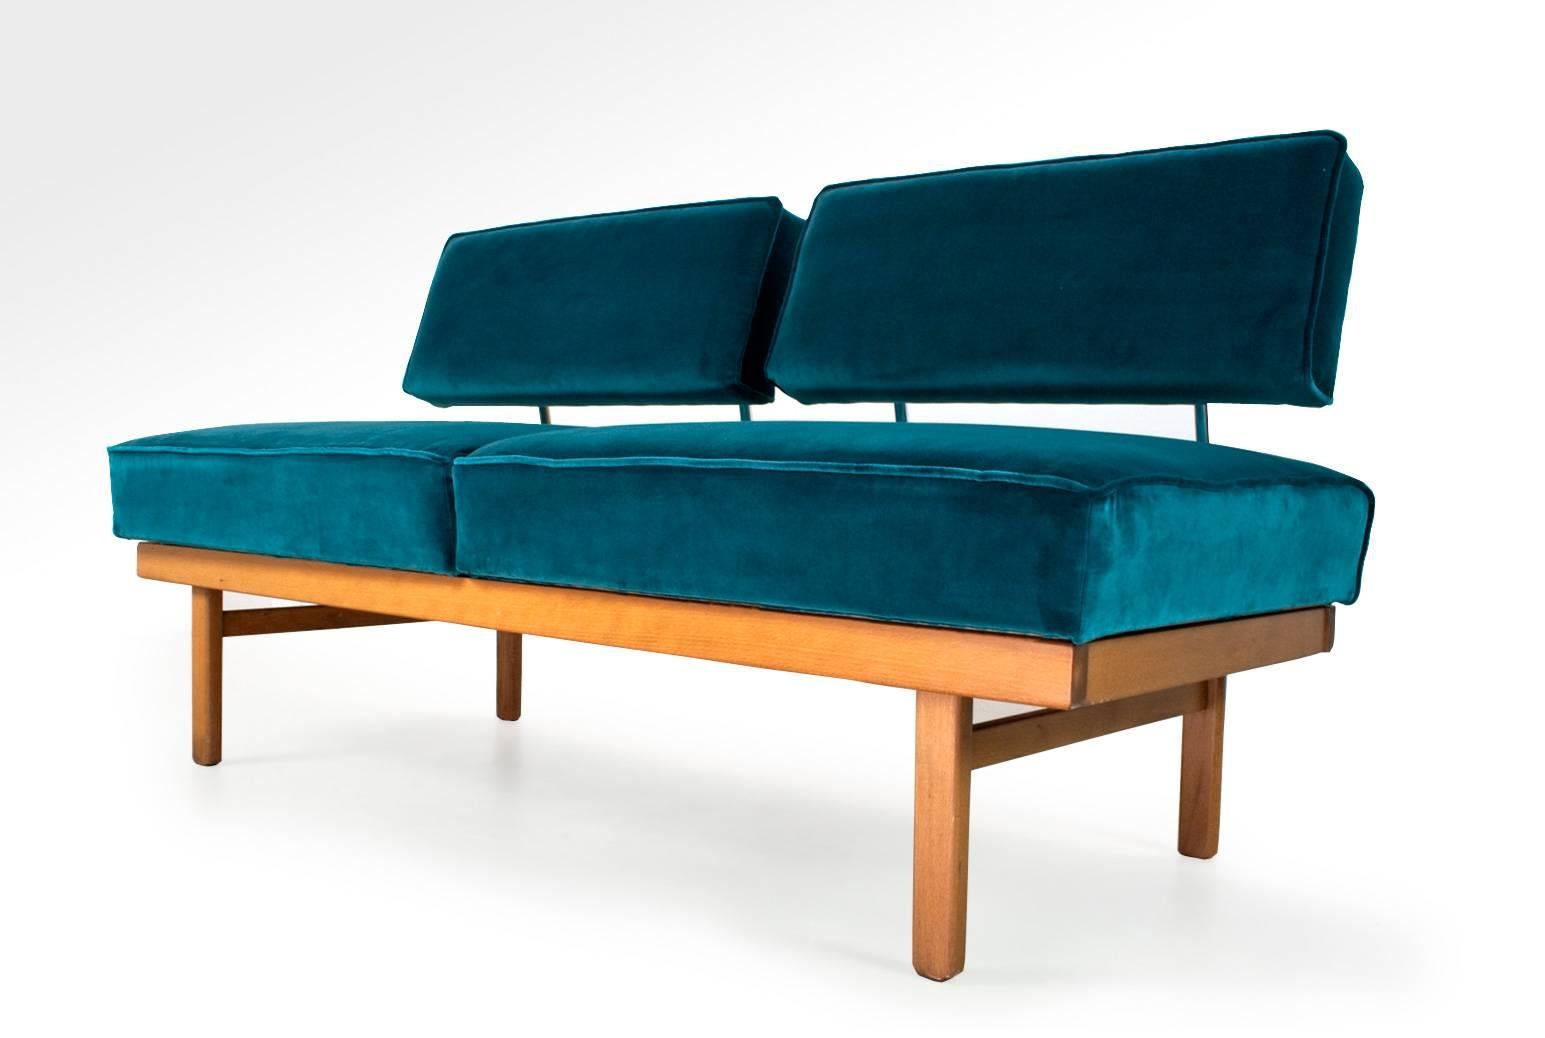 Mid-Century Modern daybed (or two-seat sofa) by Wilhelm Knoll, Germany 1950s, model 'Stella'. Re-upholstered in a high quality teal colored 100% cotton furniture velvet. A barrel-arbor mechanism changes the sofa into a comfortable daybed by sliding